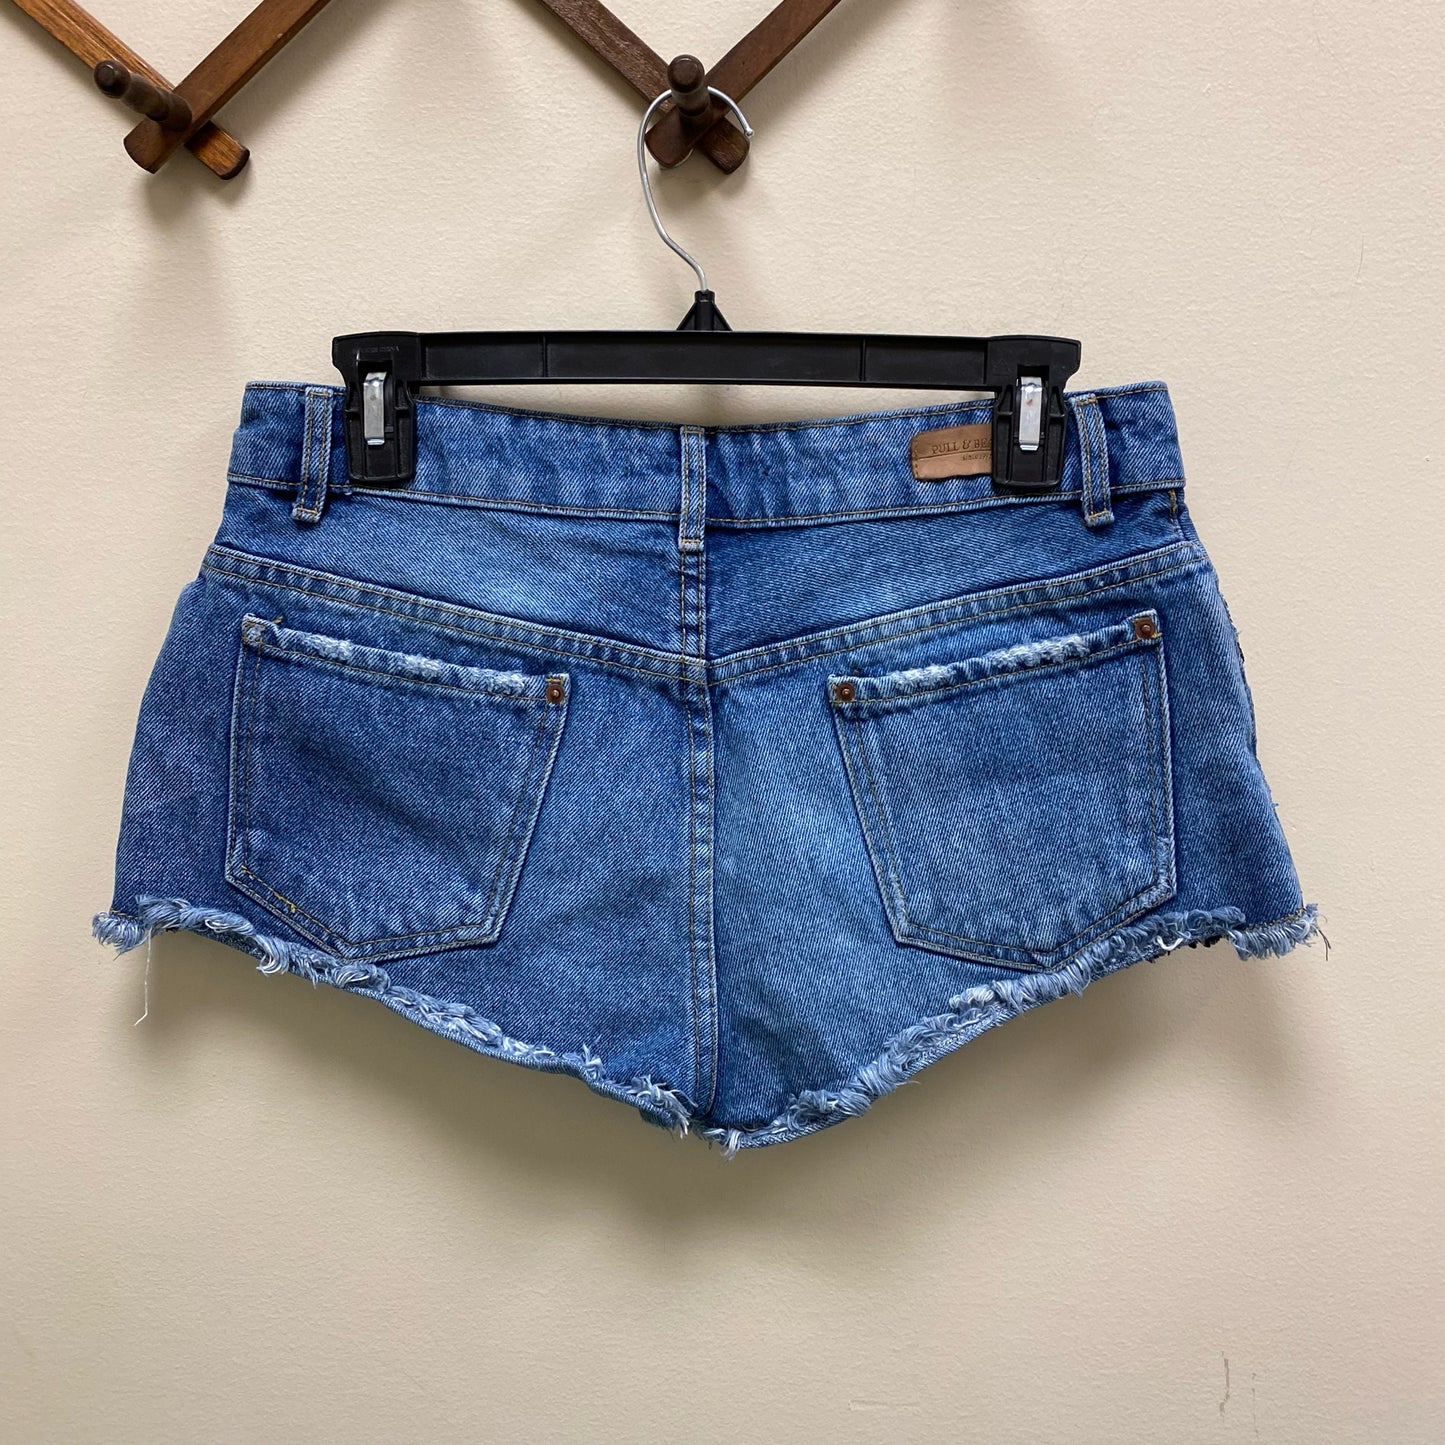 Pull&Bear Denim Embroidered Shorts - Size 24 (00)